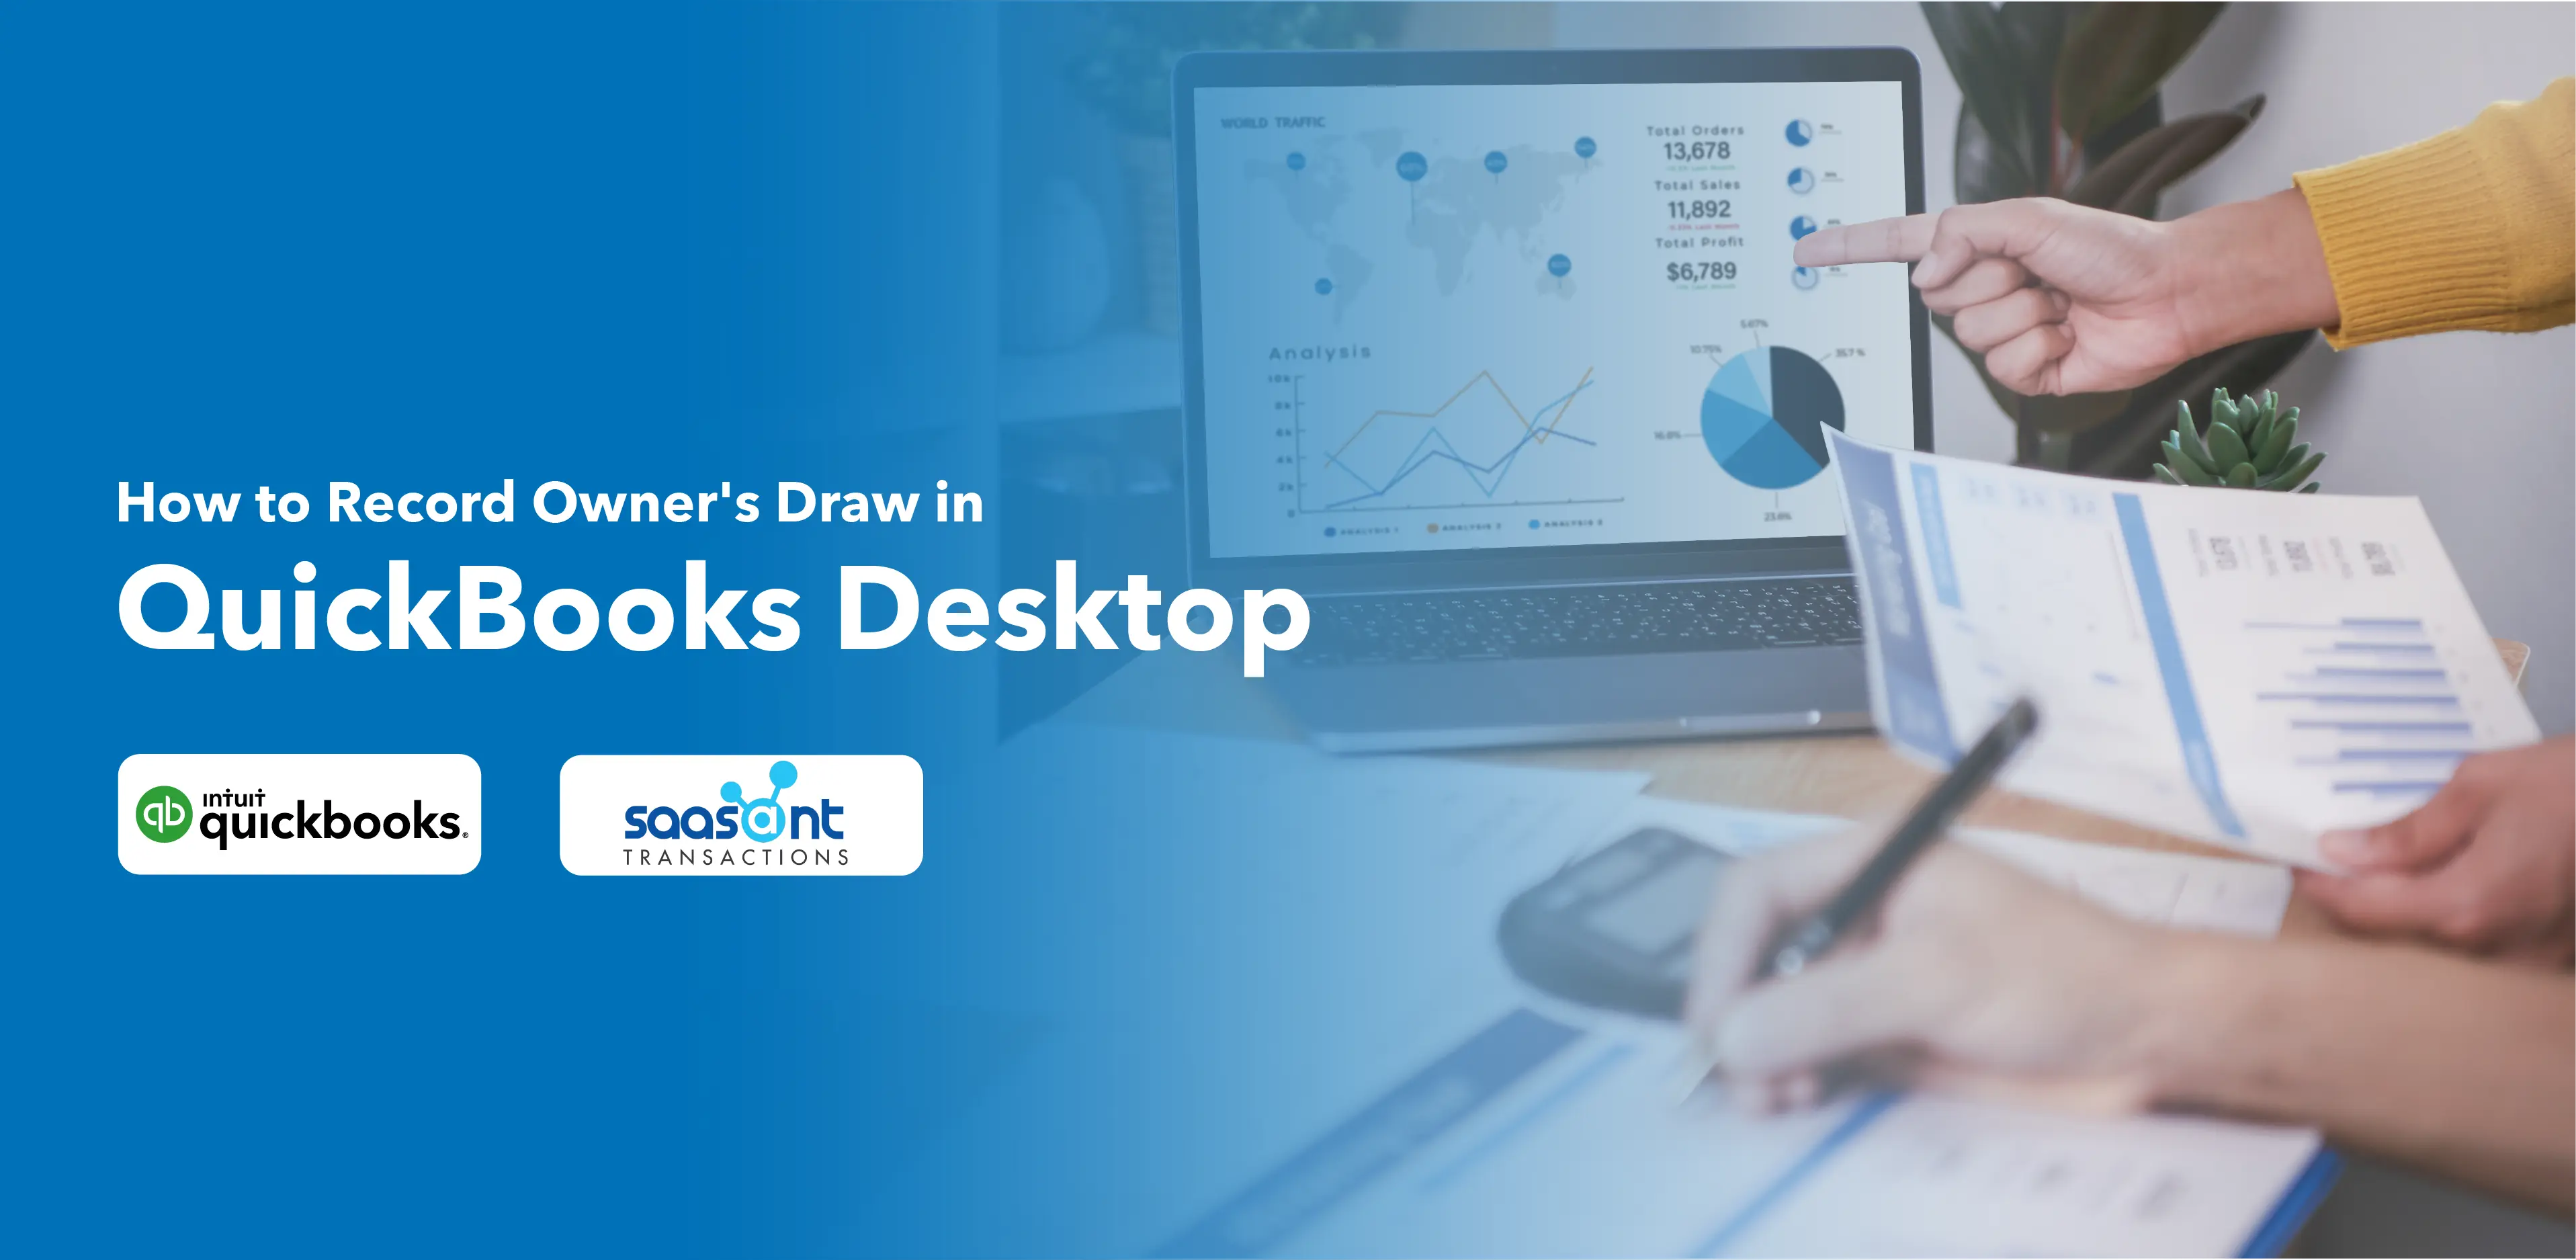 How to Record Owner’s Draw in QuickBooks Desktop